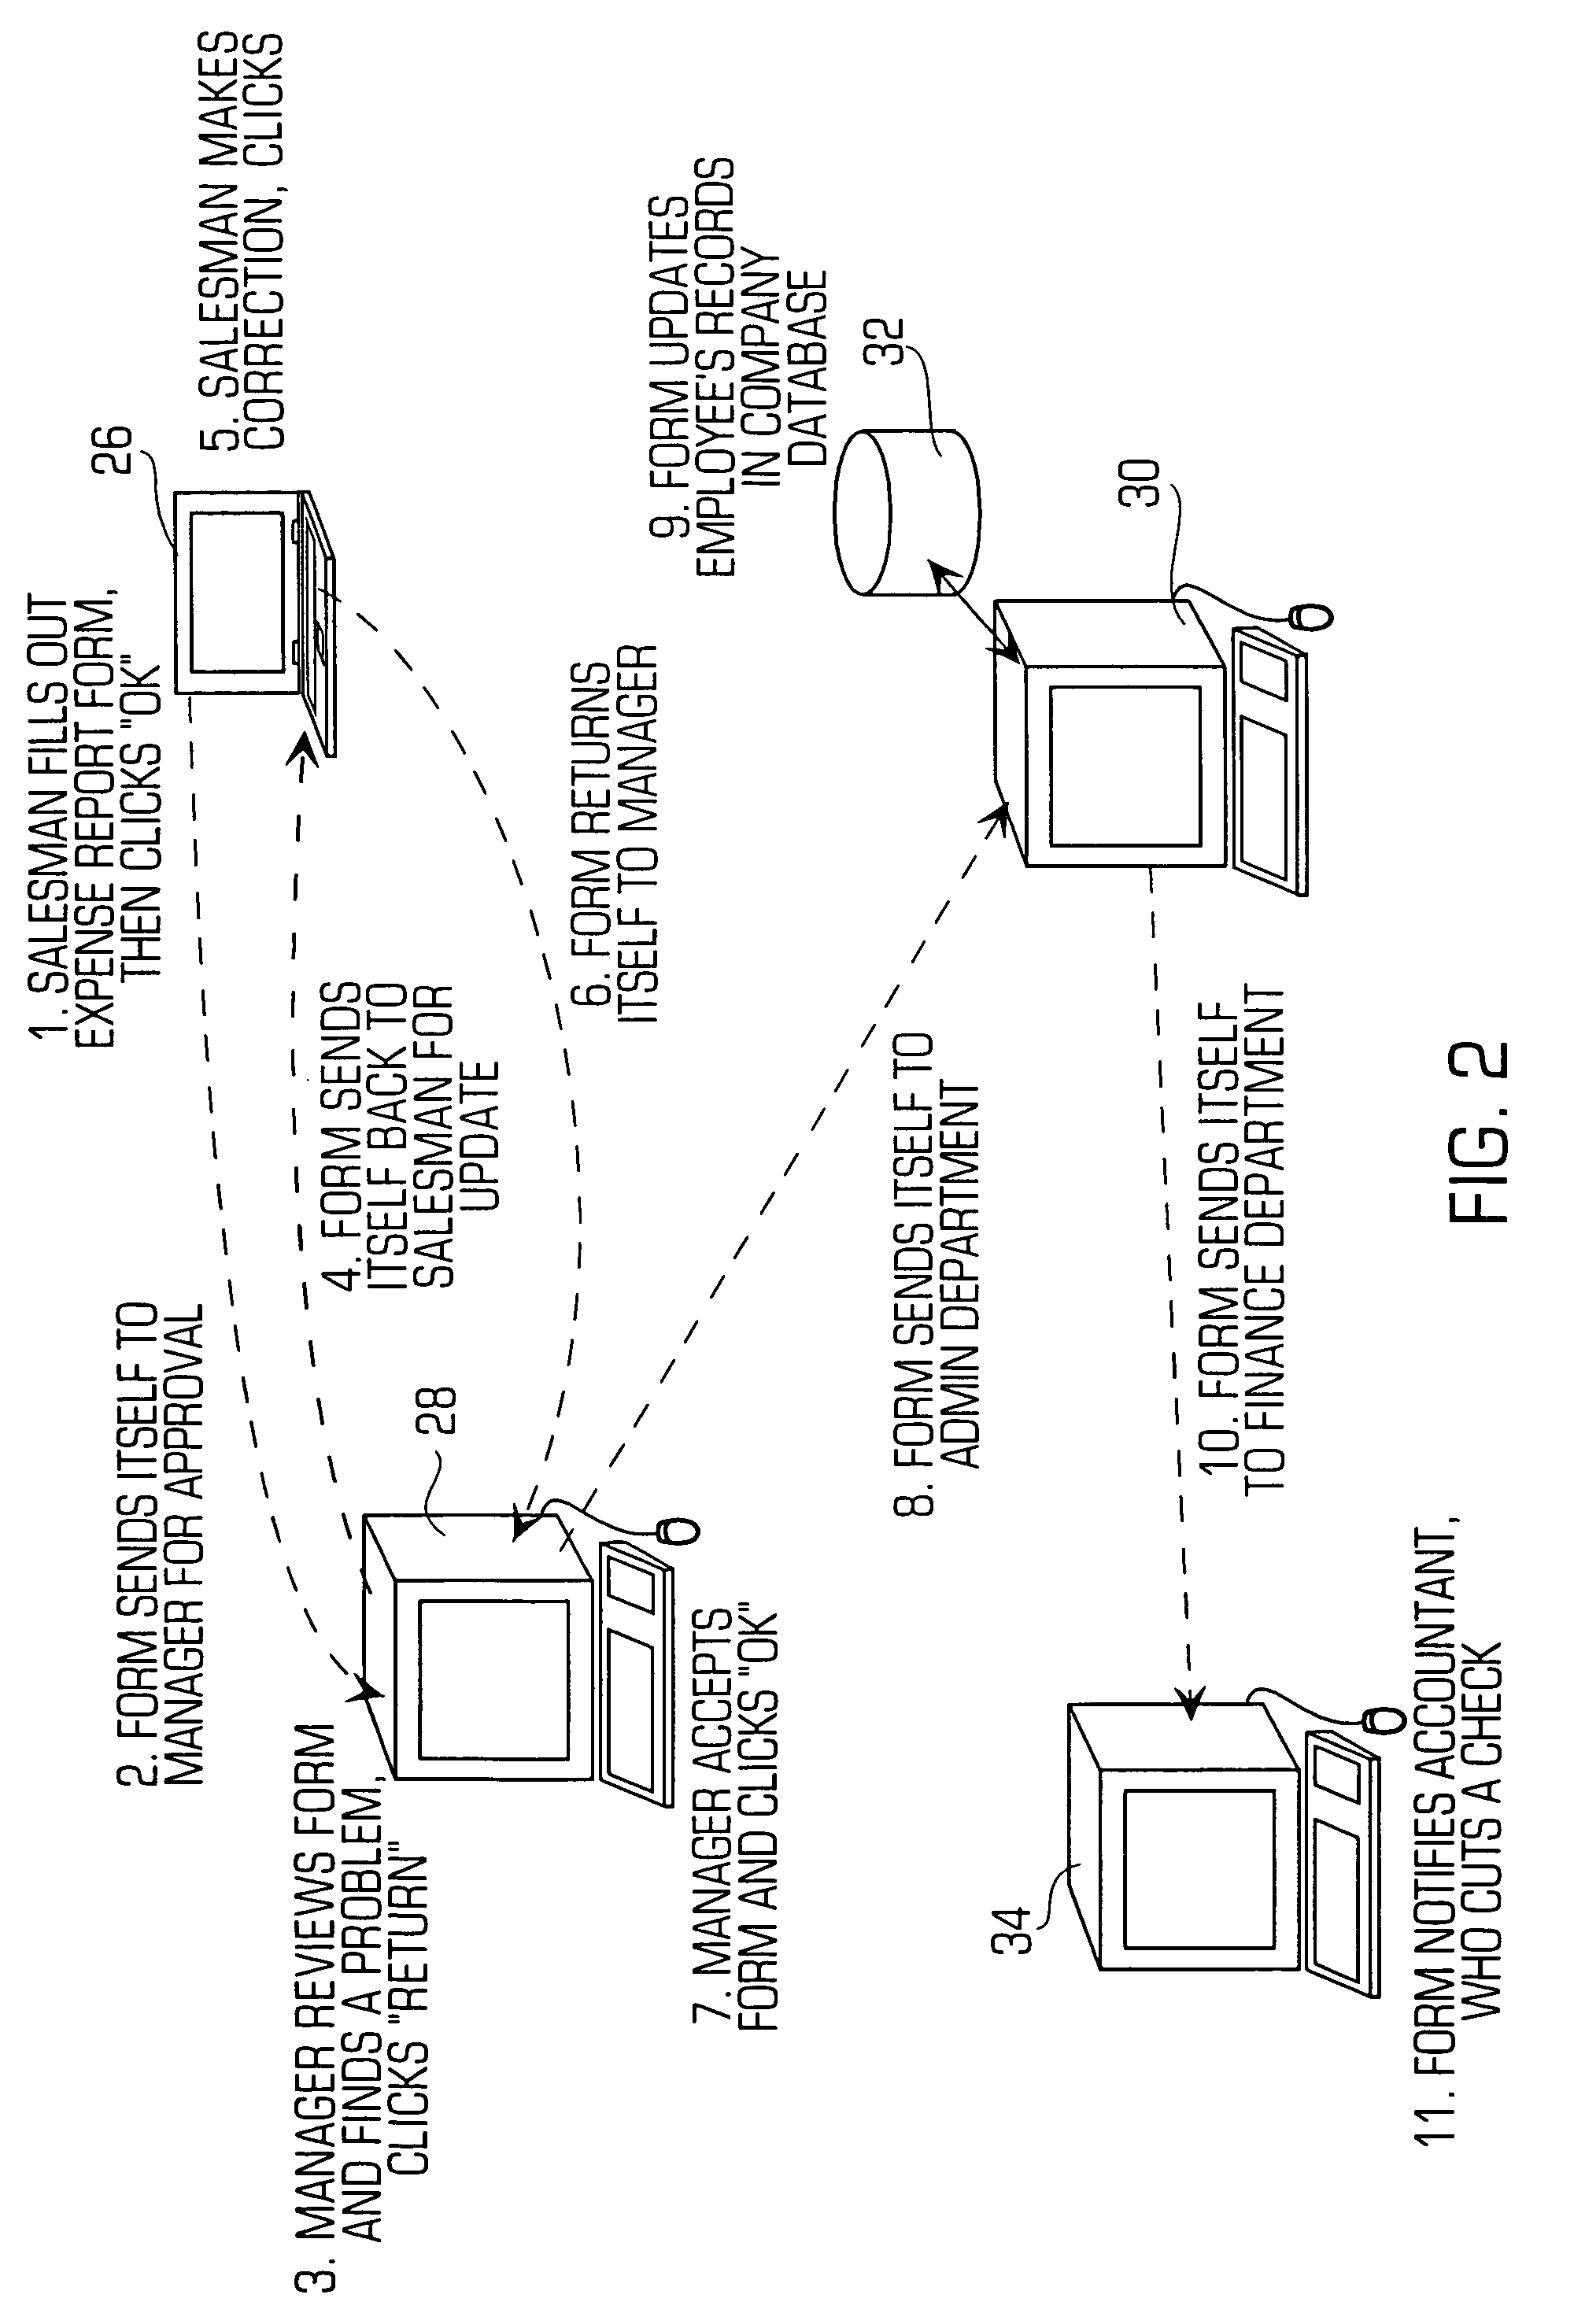 Mobile application peer-to-peer security system and method